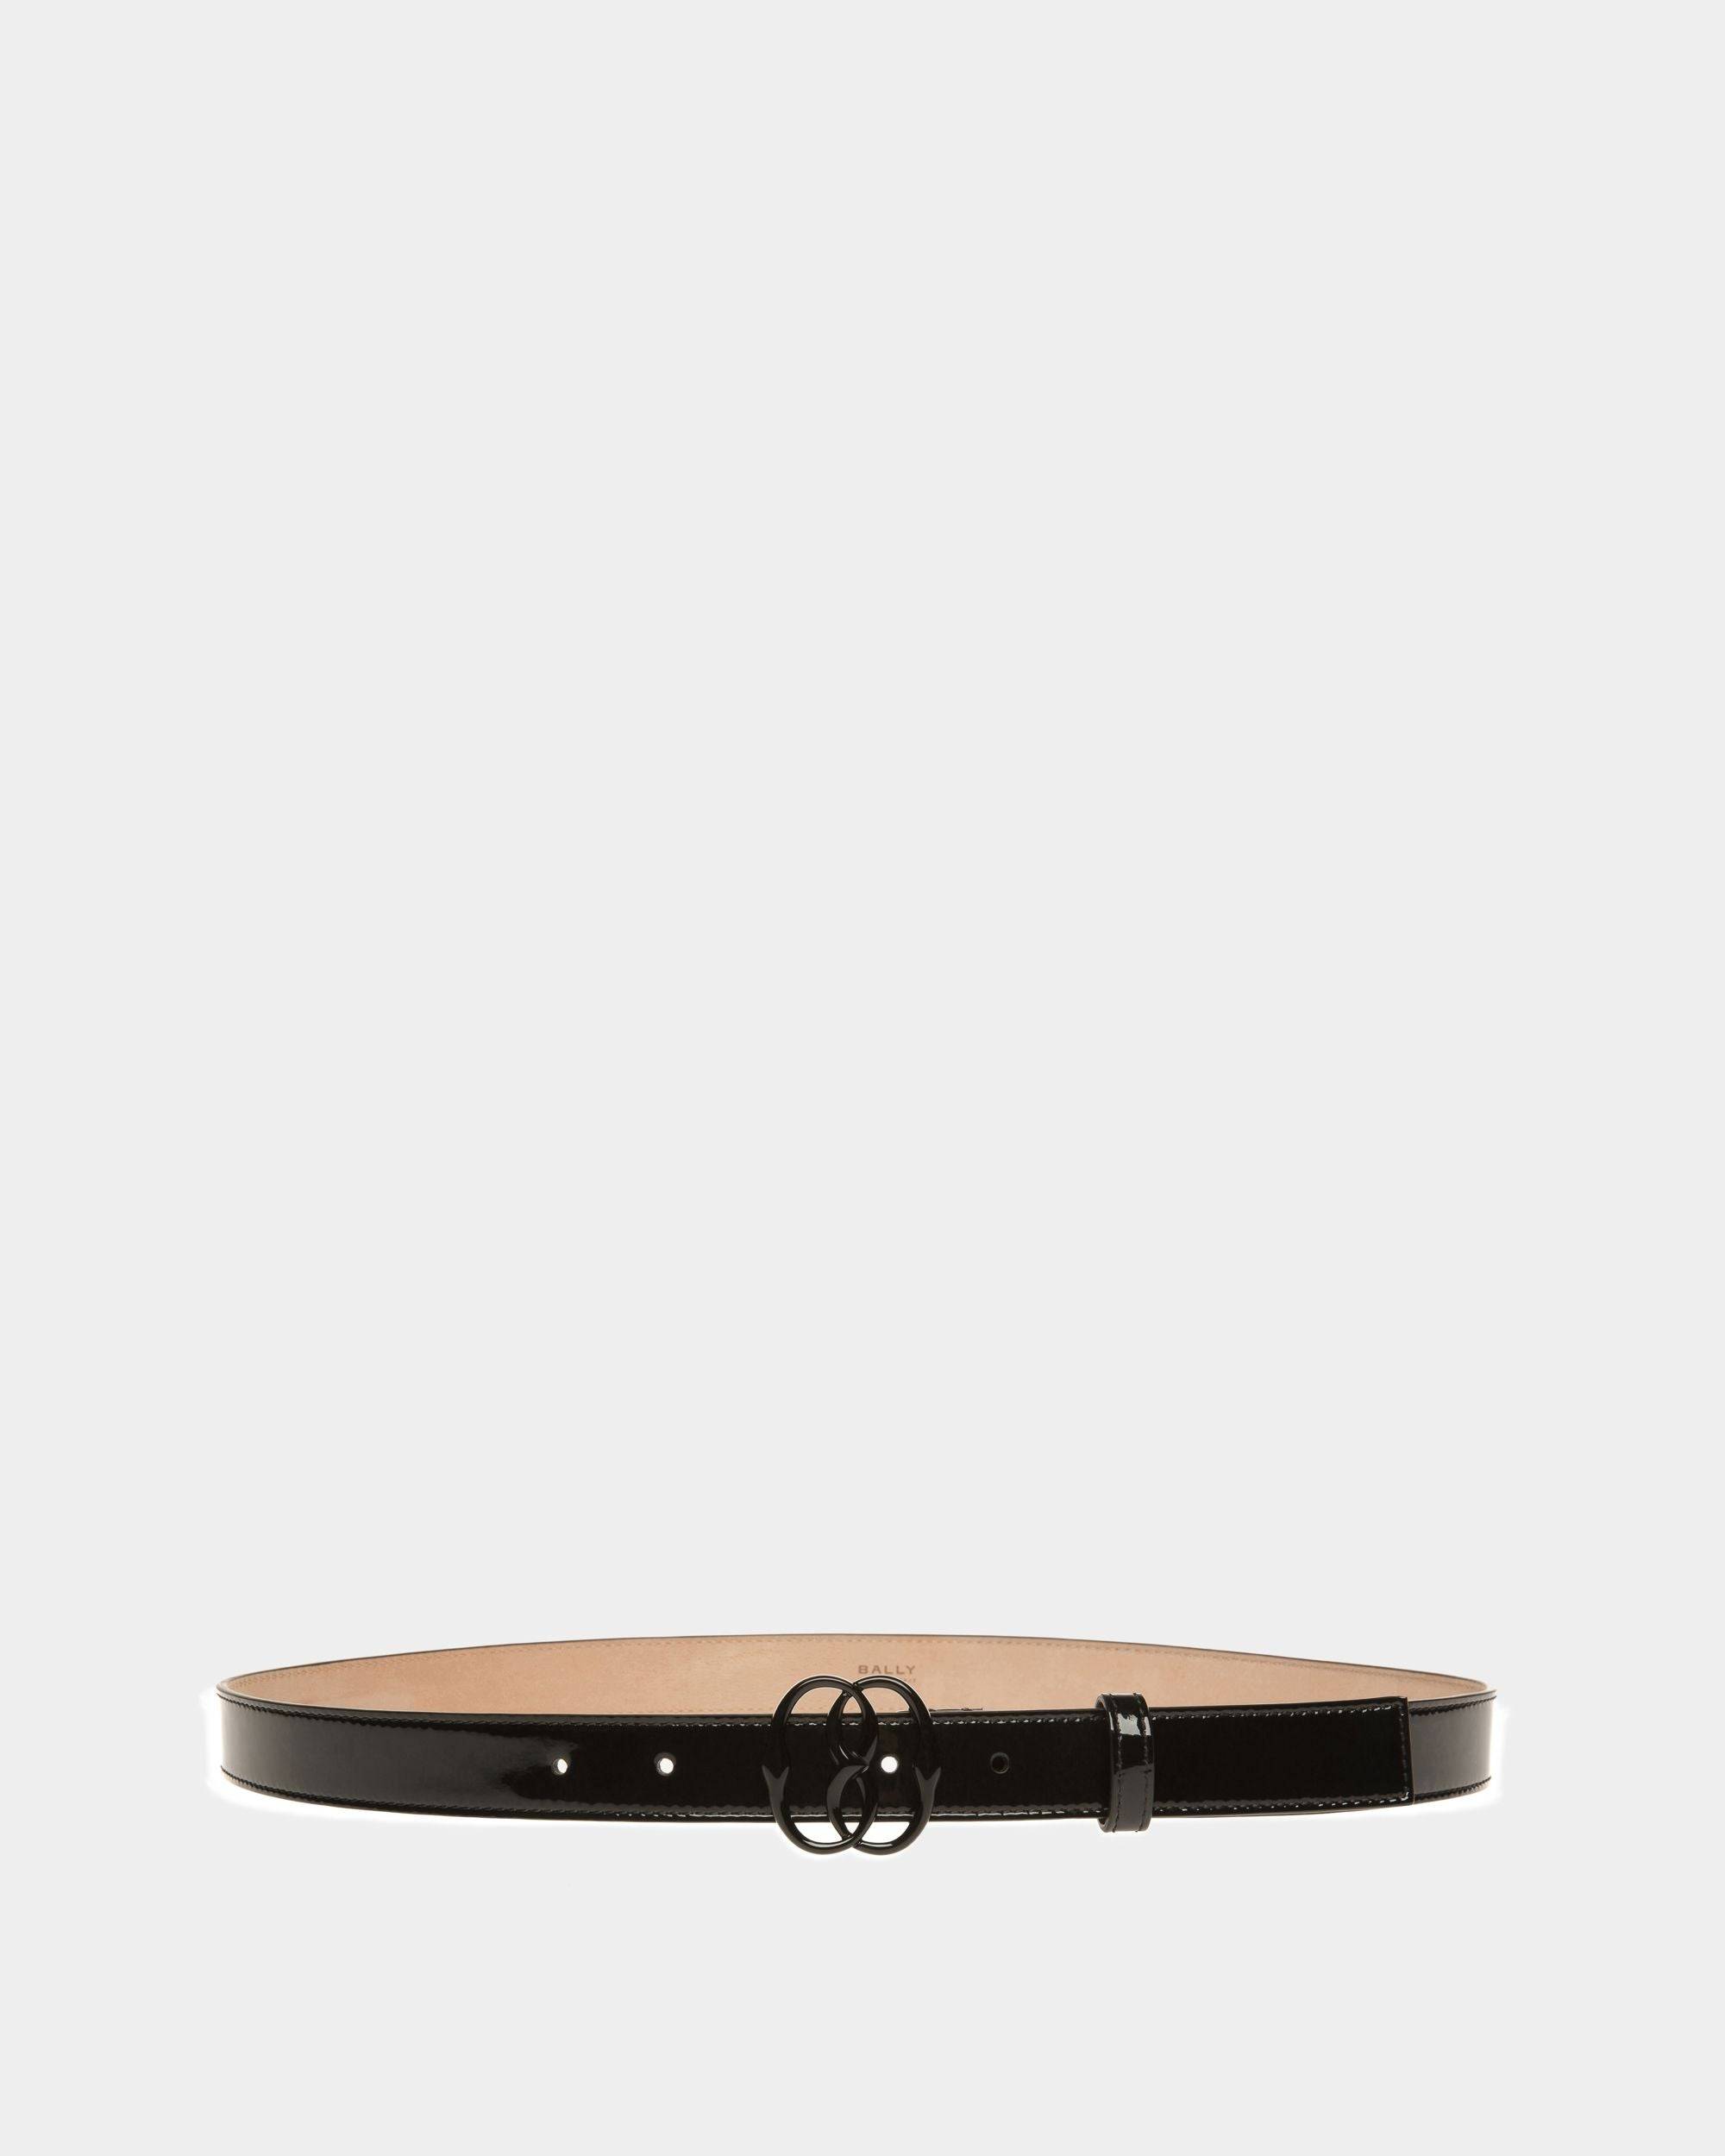 Women's Emblem Fixed Belt In Black Leather | Bally | Still Life Front